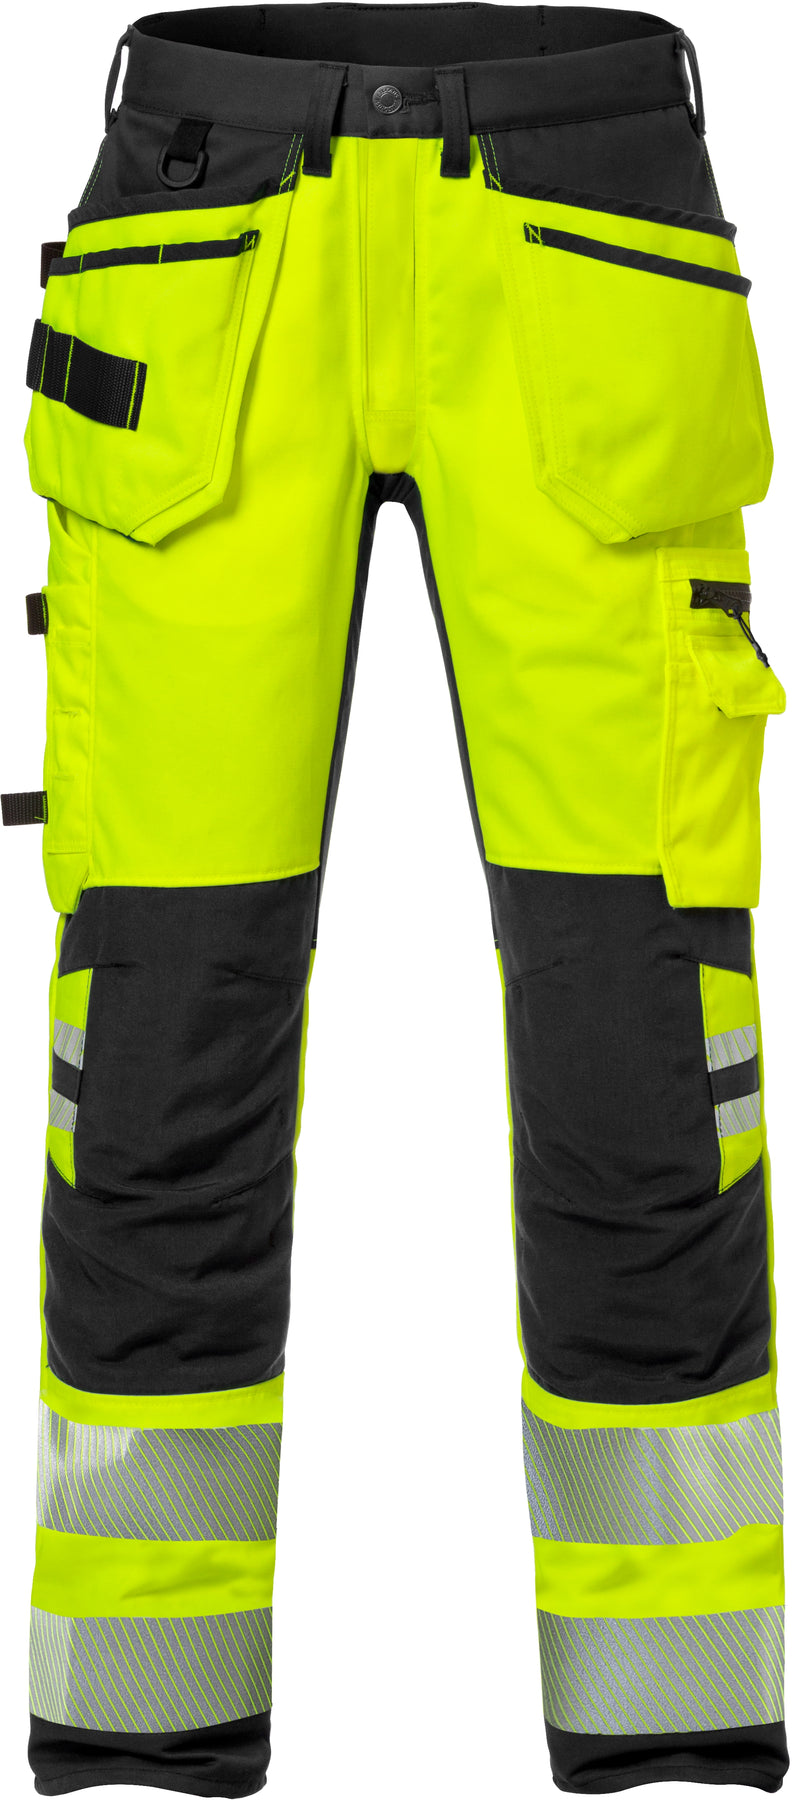 Load image into Gallery viewer, Trousers FRISTADS HIGH VIS CRAFTSMAN STRETCH TROUSERS CLASS 2 2707 PLU
